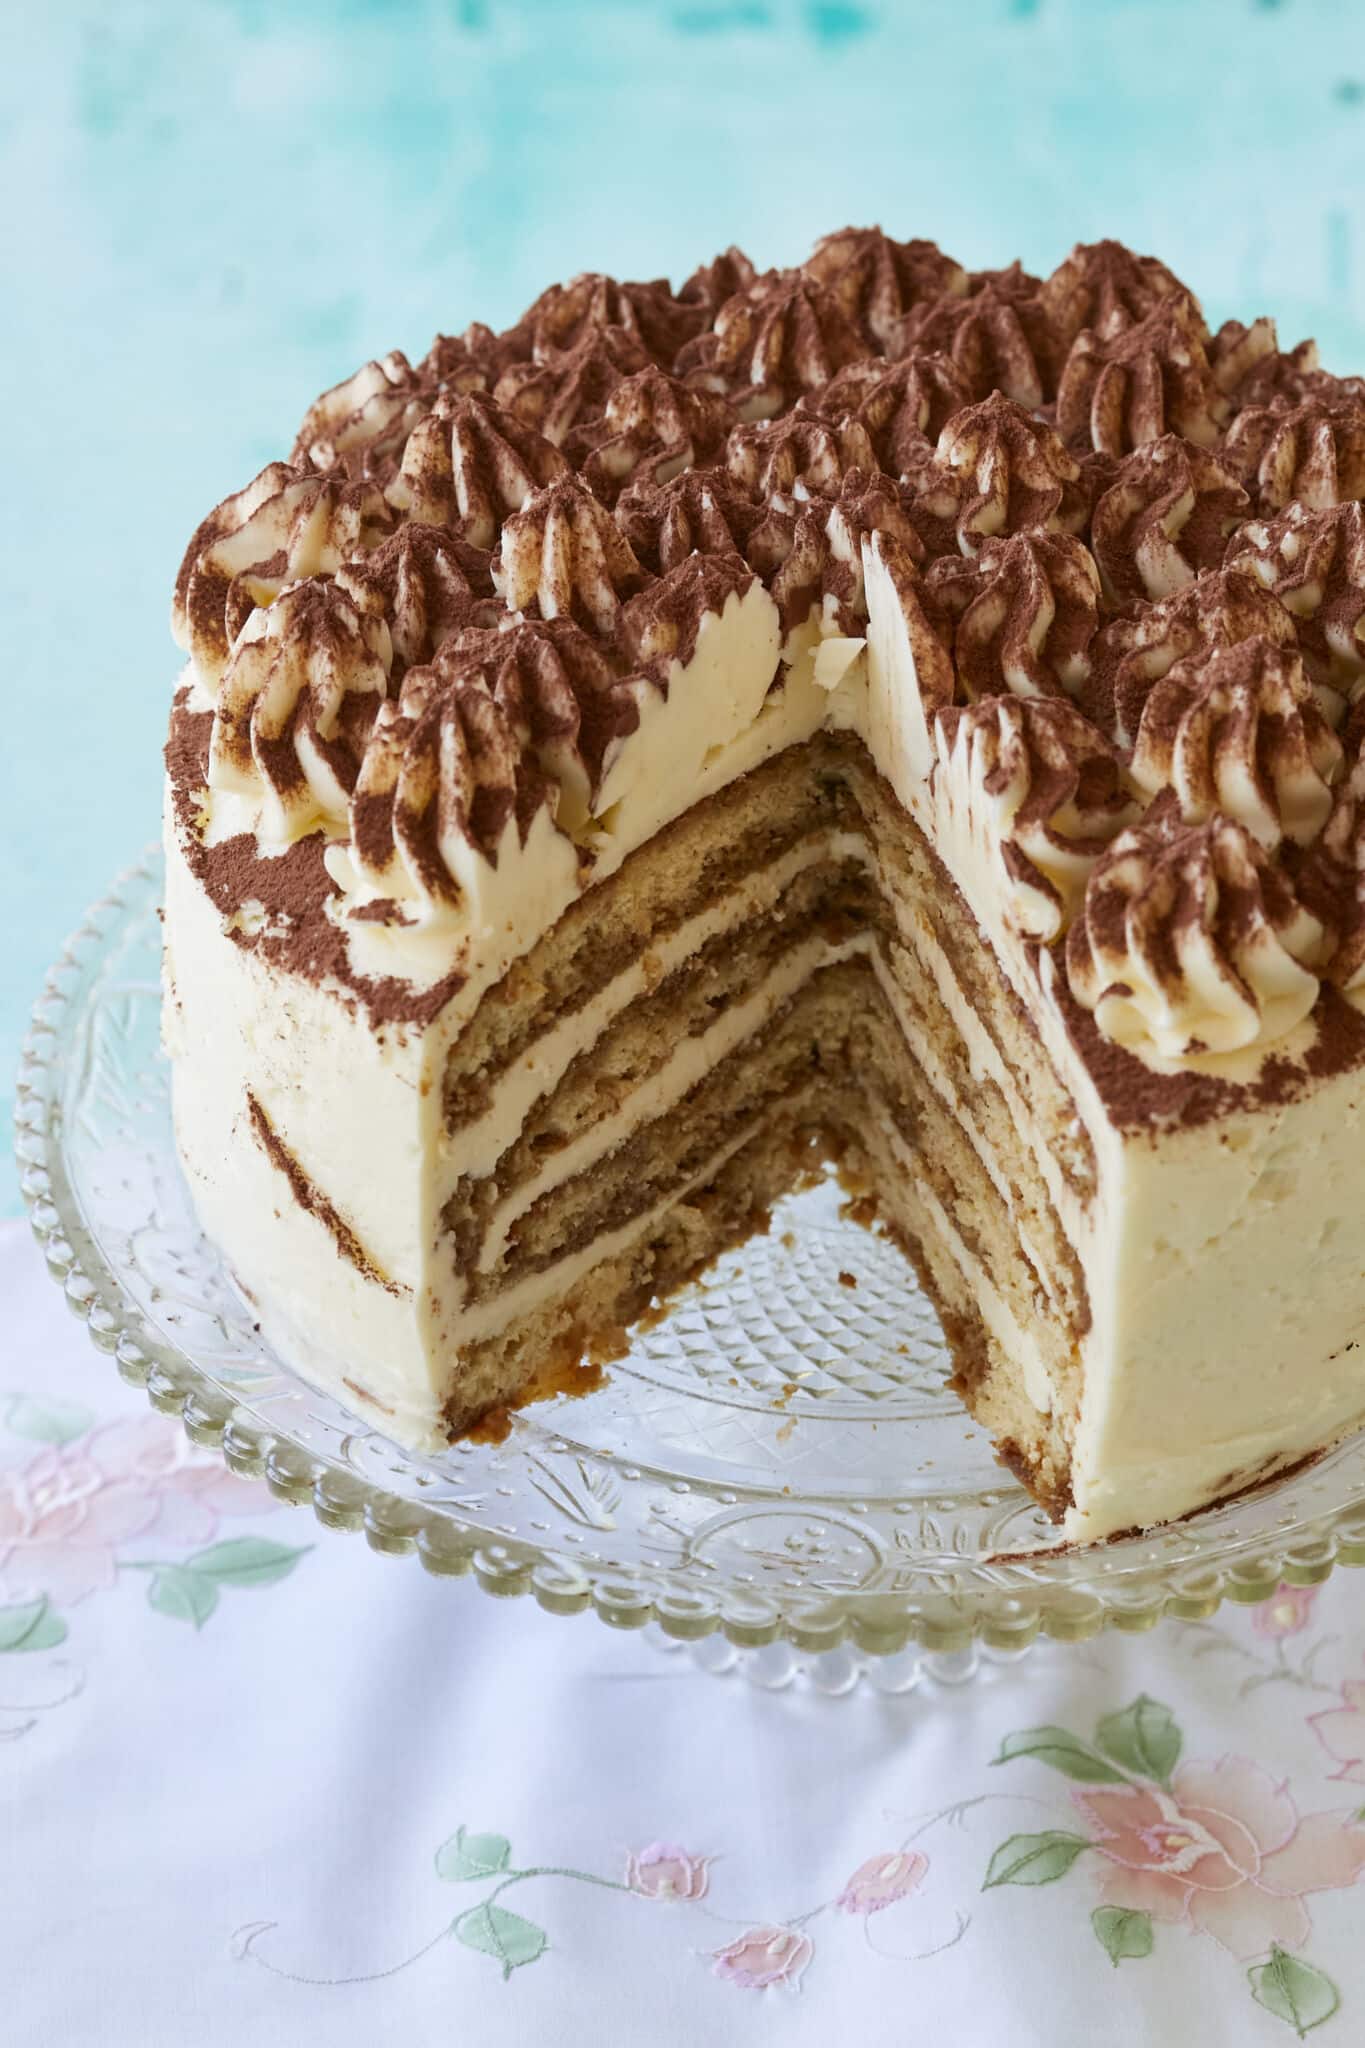 A Stunning Tiramisu Cake is being displayed on a glass cake stand with one generous slice has been cut off. The inside shows its layers of coffee-soaked sponge cake filled with creamy mascarpone. This layered tiramisu cake is topped with rosettes and dusted cocoa which makes it visually appealing. 